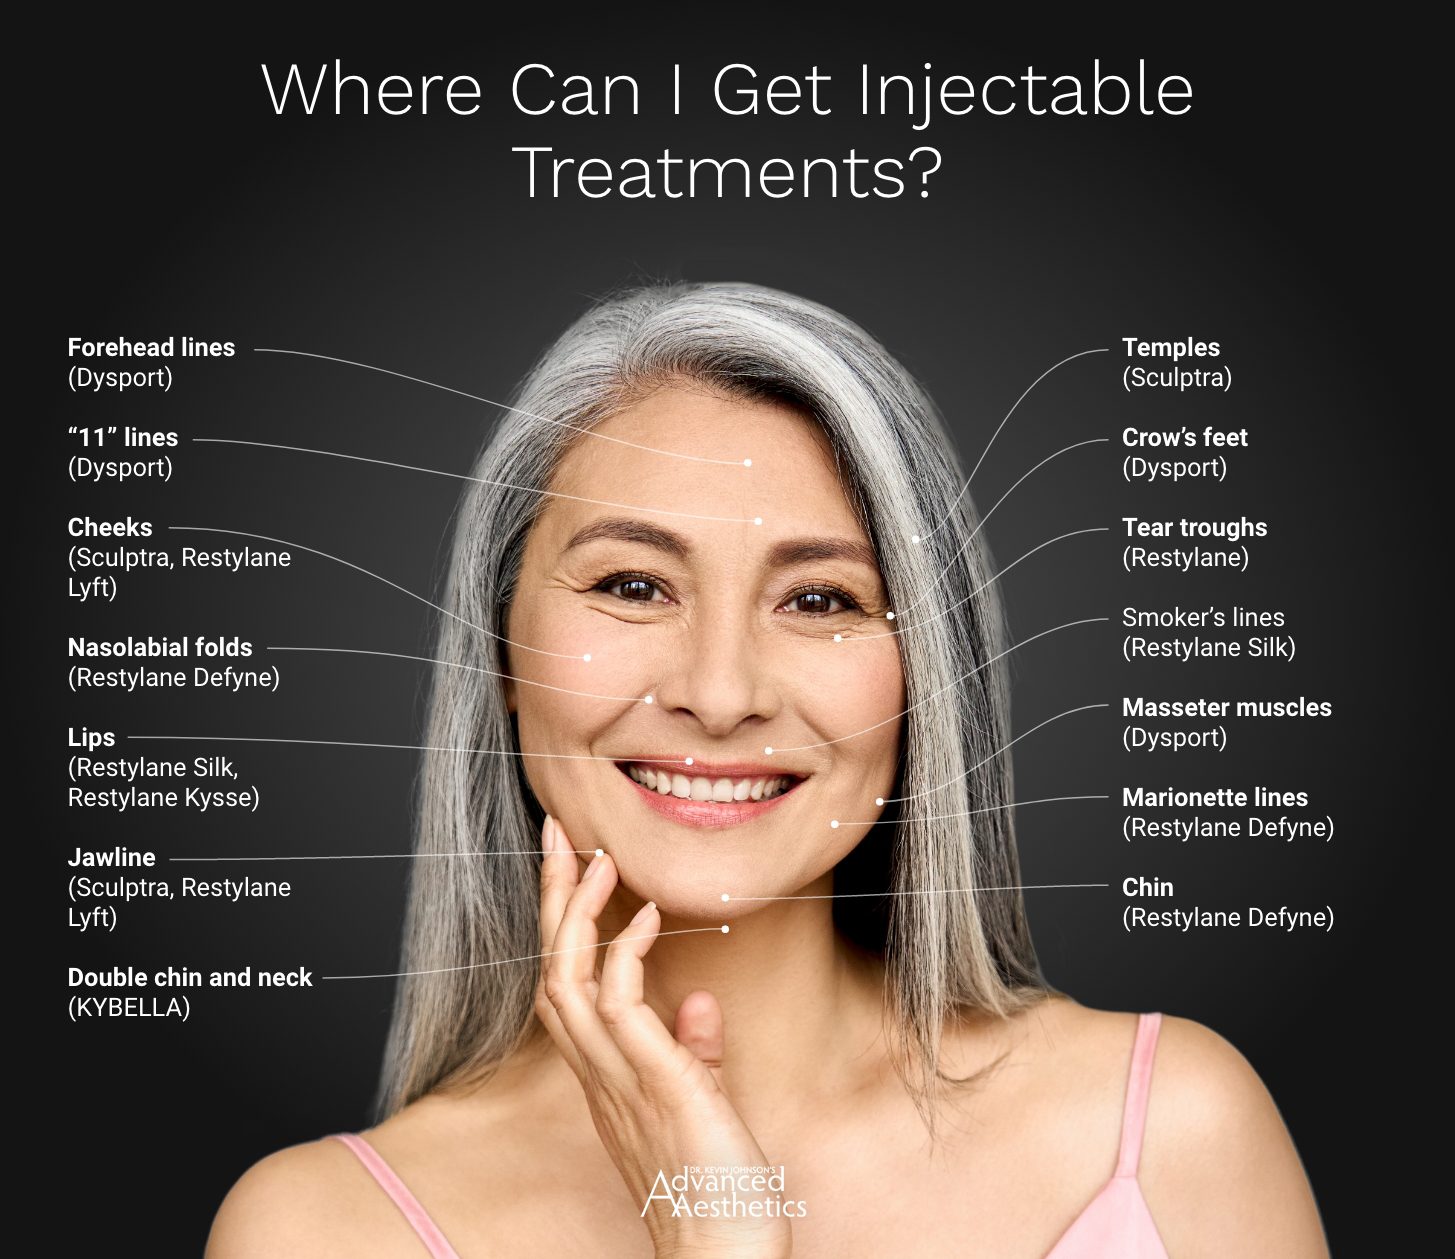 Injectable treatment areas and which product can be used in each area